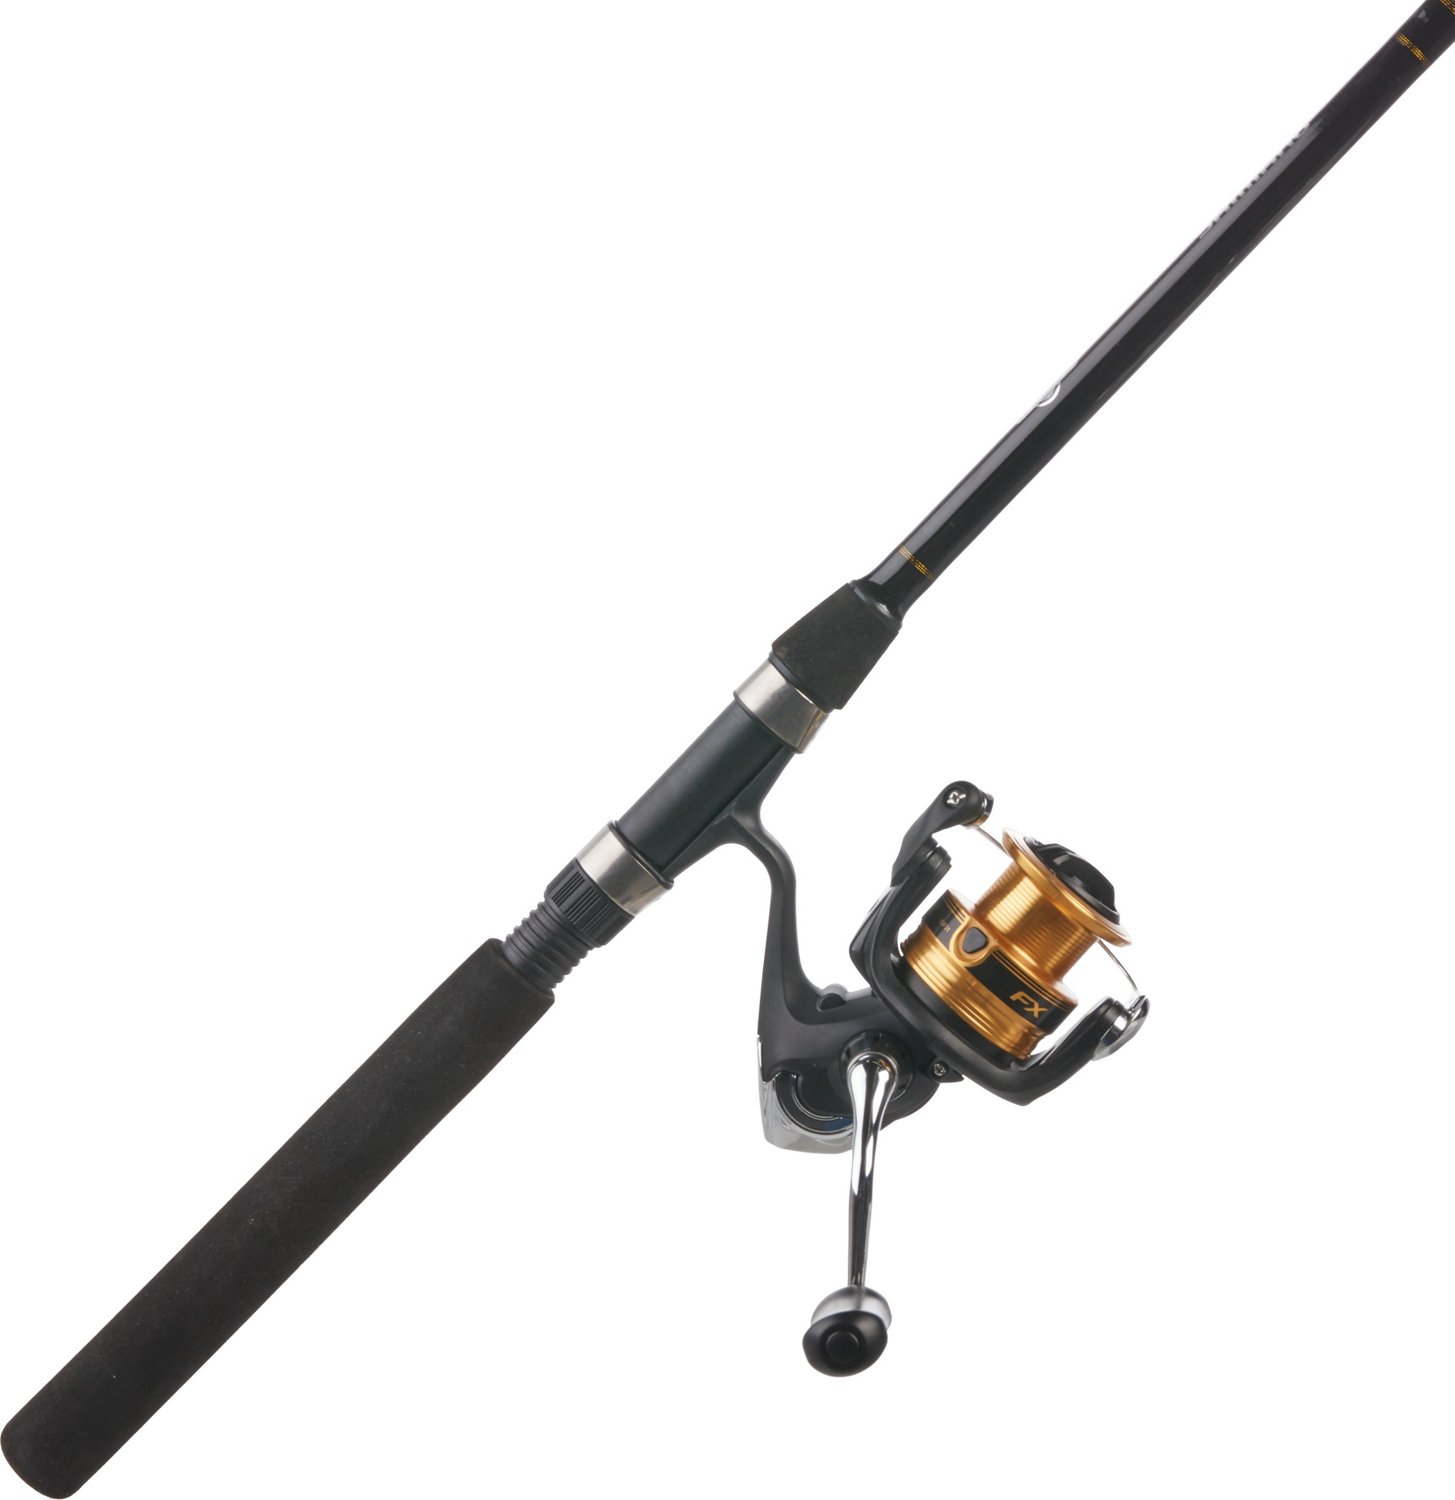 BlueForce Sports - 💎 LEO GT4000 1.8-3.6M Carbon Telescopic Fishing Rod Reel  Combo Travel Spinning Fishing Pole Sets 💎 By 🔥 Specifications: Brand LEO  Product Fishing Rod and Reel Combos Material Hard